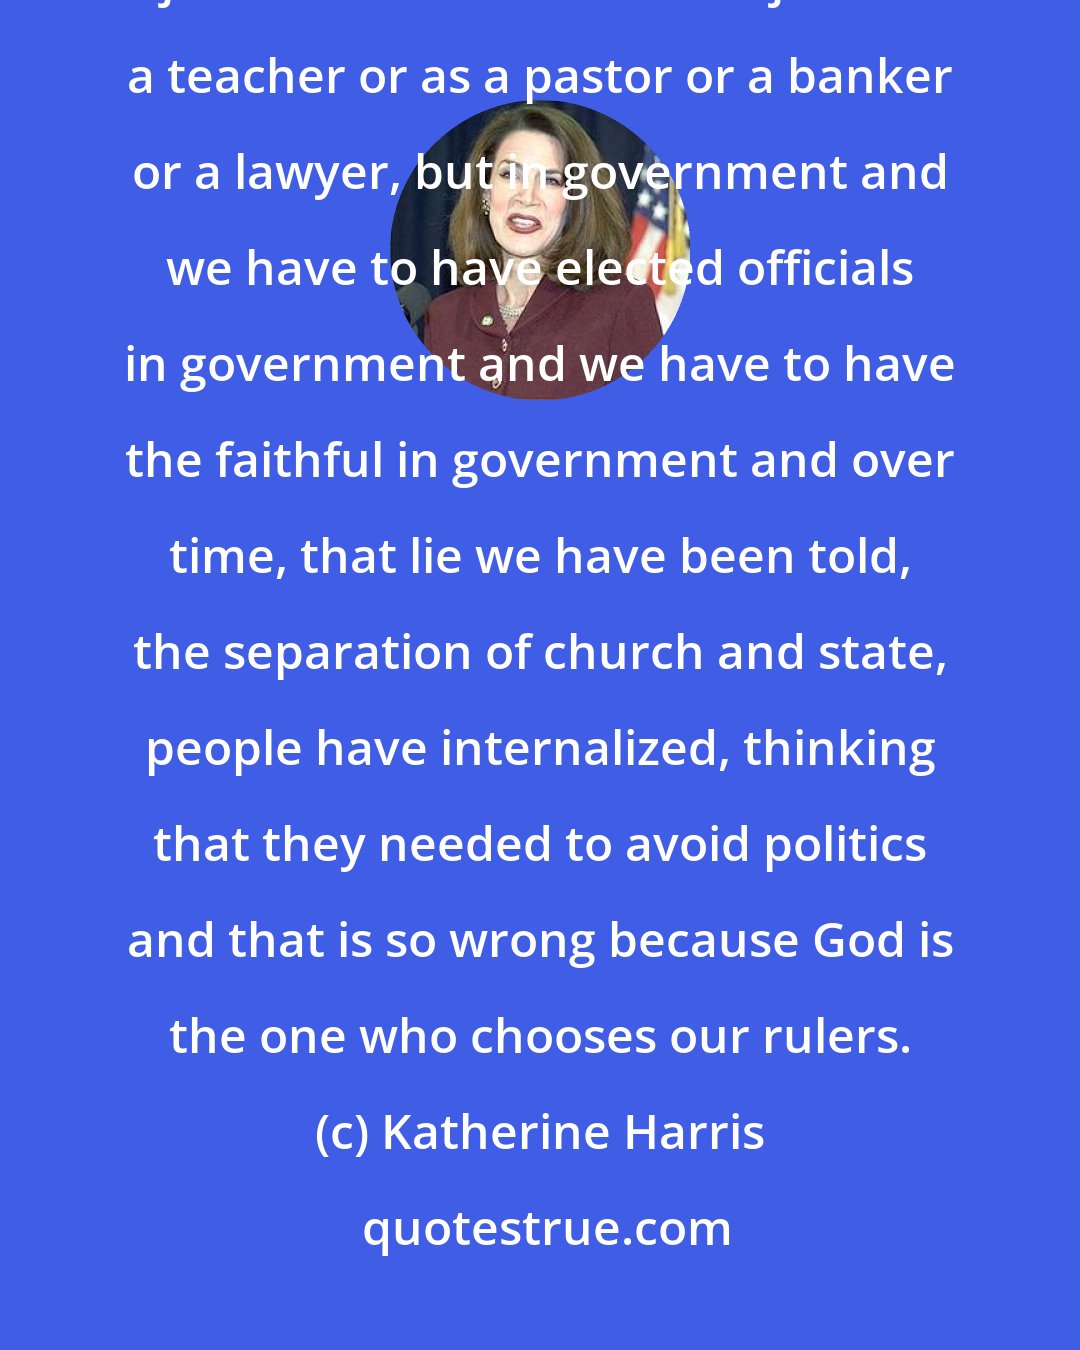 Katherine Harris: The Bible says we are to be salt and light. And salt and light means not just in the church and not just as a teacher or as a pastor or a banker or a lawyer, but in government and we have to have elected officials in government and we have to have the faithful in government and over time, that lie we have been told, the separation of church and state, people have internalized, thinking that they needed to avoid politics and that is so wrong because God is the one who chooses our rulers.